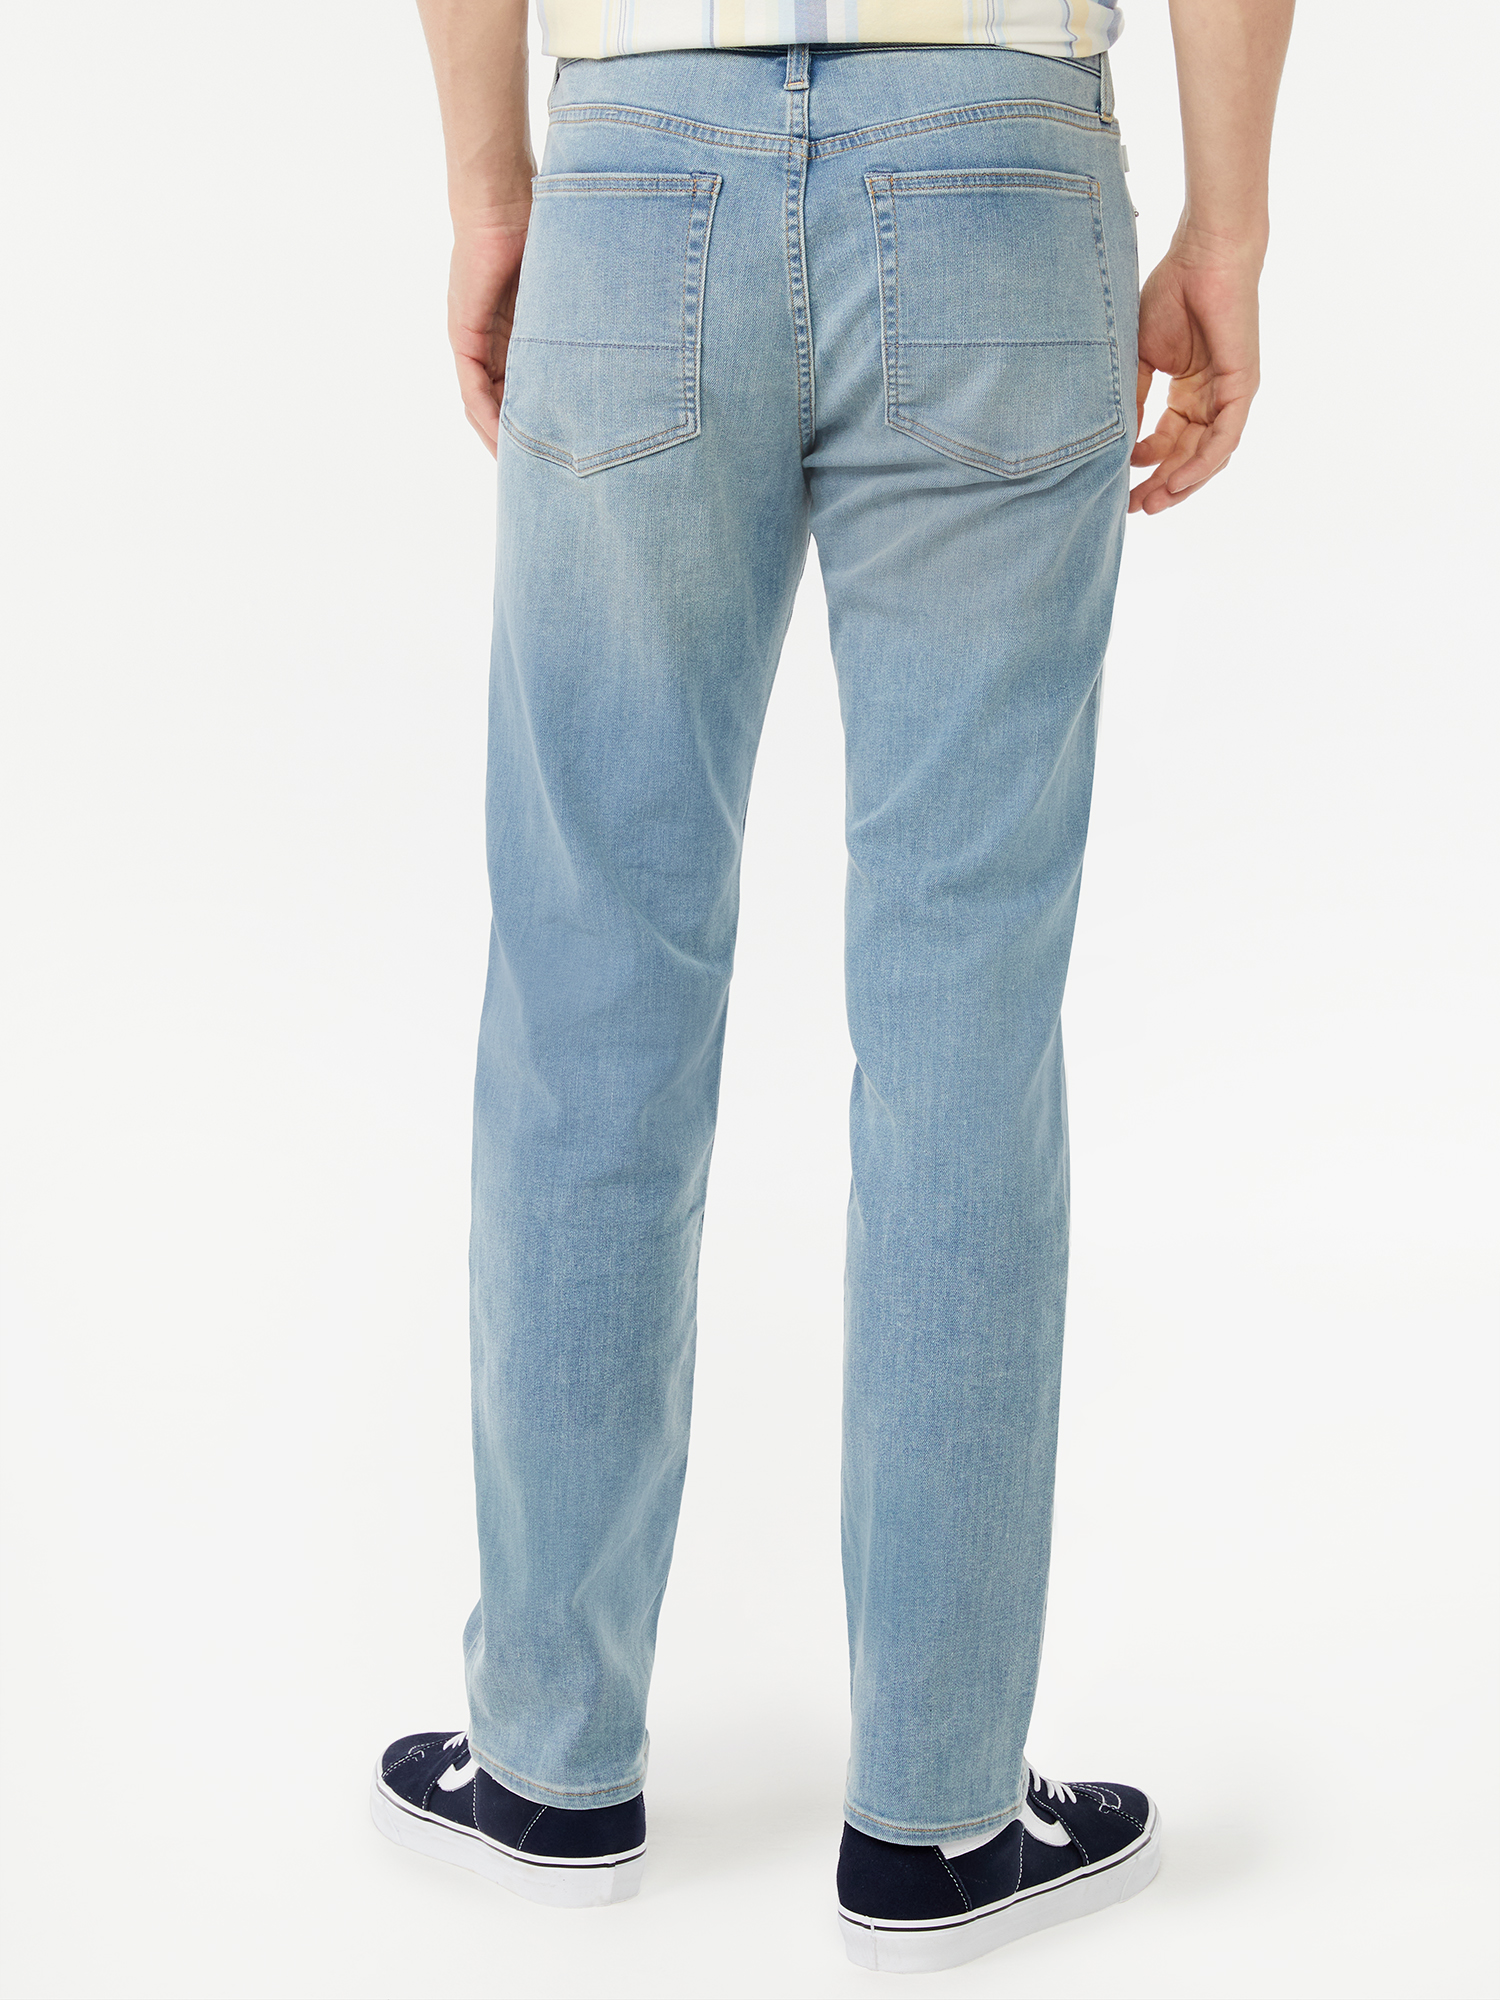 Free Assembly Men's Mid Rise Slim Jeans - image 3 of 6